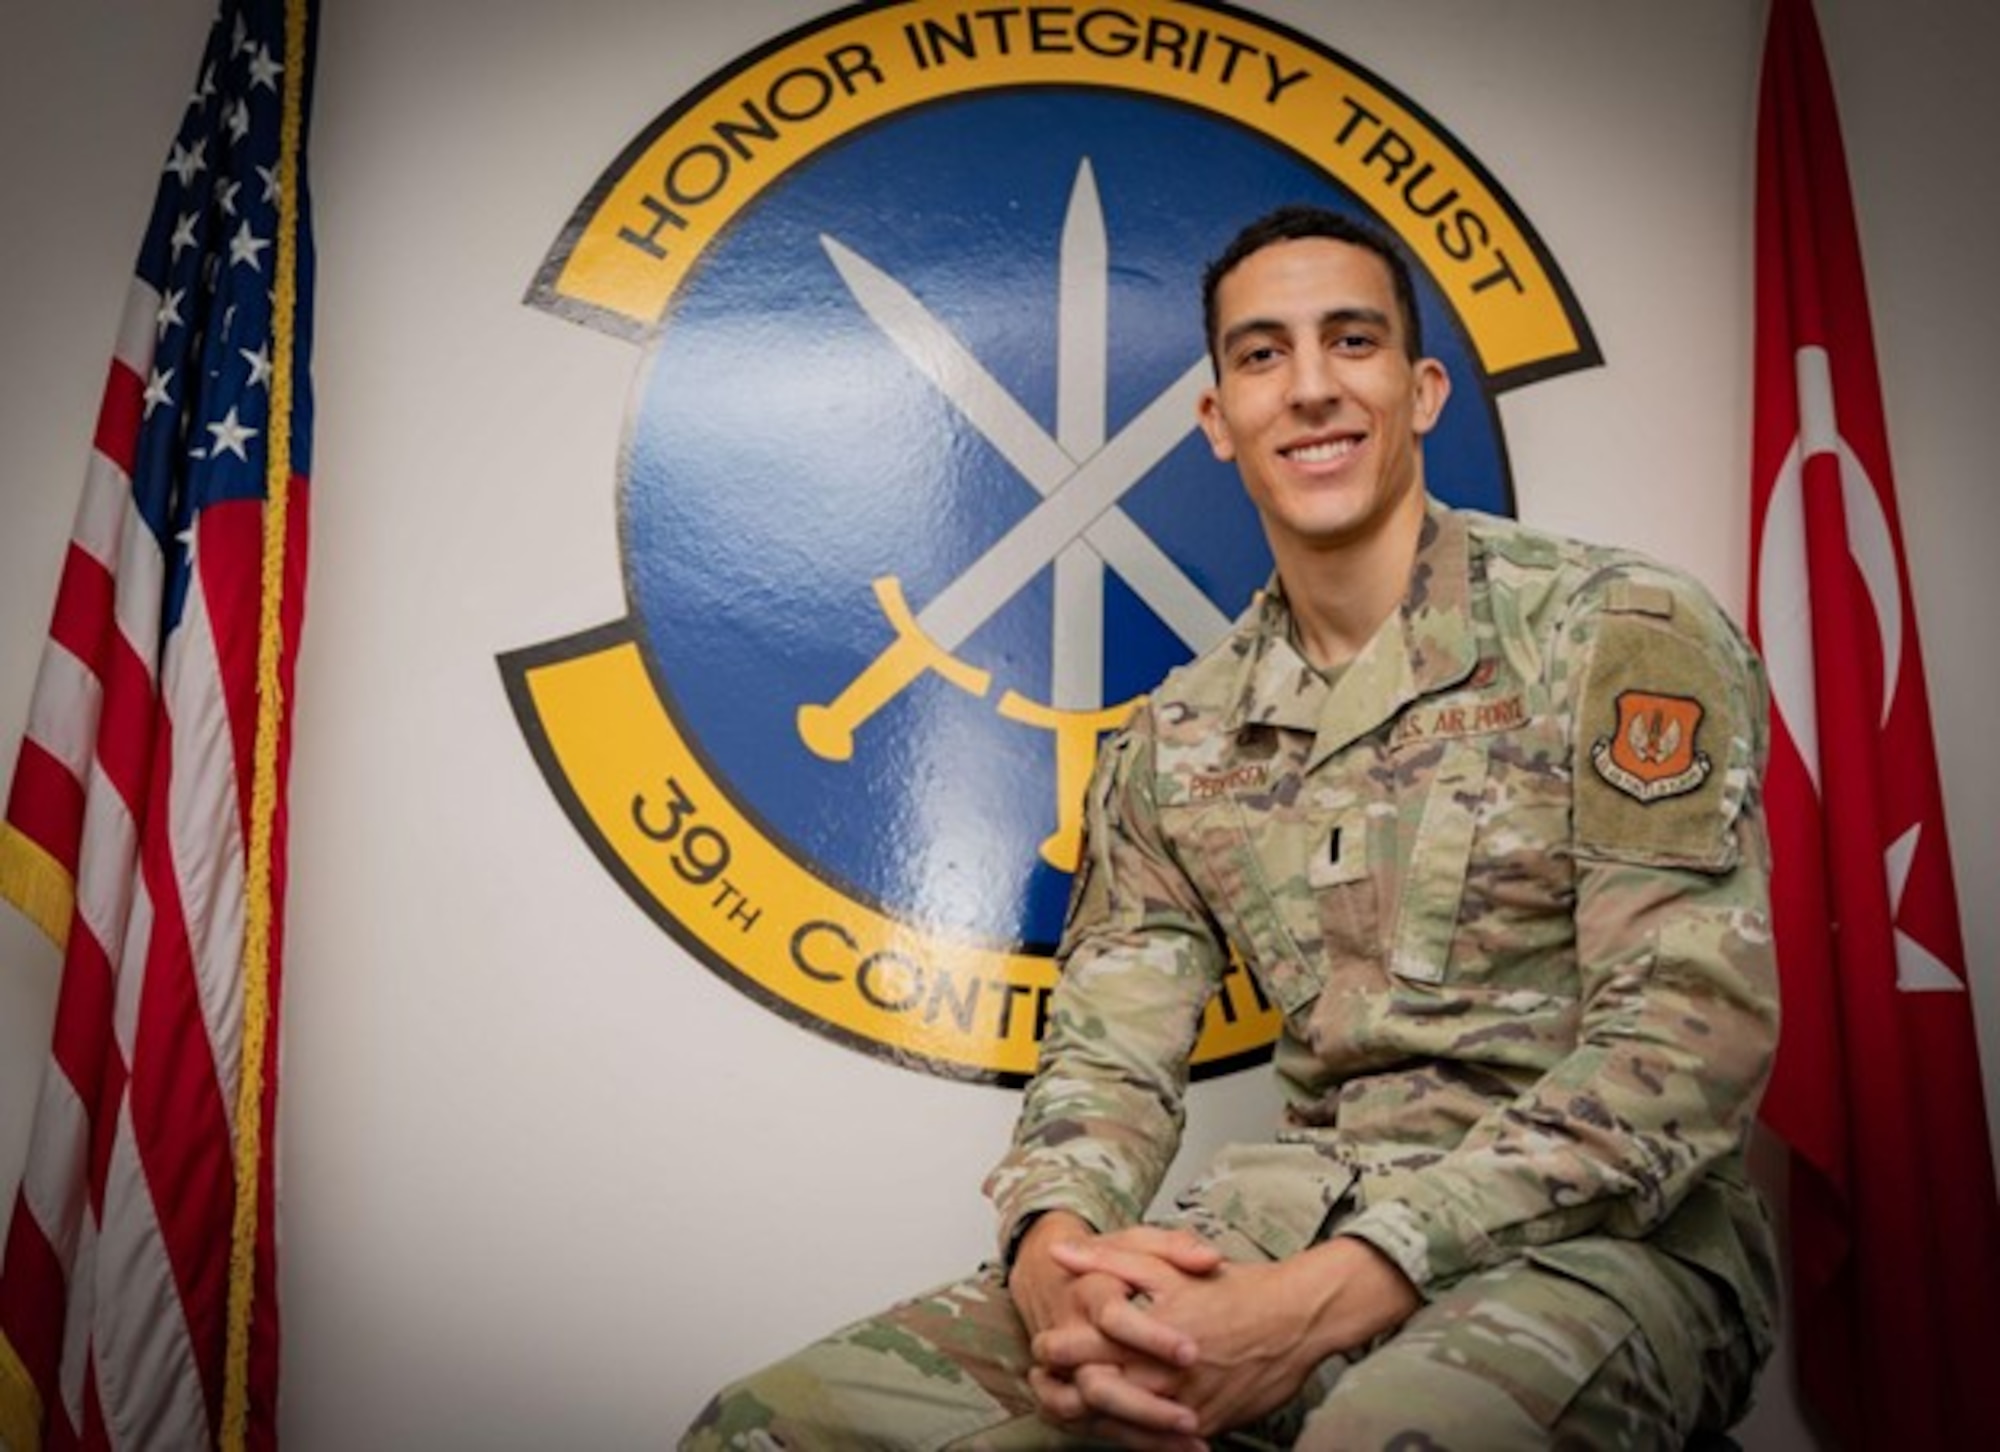 To celebrate #HispanicHeritageMonth, we’ve asked Airmen of Hispanic heritage from across the wing to share their stories and why they serve:

1st Lt. Miguel Pedersen is originally from the Dominican Republic and serves as the services flight commander for the 39th Contracting Squadron at Incirlik Air Base. His section manages contracts for personnel and leases in the area of responsibility. 

Pedersen said that he joined the military as it was his childhood passion. "I was always the kid playing with GI Joe action figures and reading WWII books," explained Pedersen. "I can still vividly recall the first time I saw someone in uniform."

With guidance from his mother, he attended the University of Florida, earning his commission through the ROTC program. 

"I considered enlisting into the Army after high school. But with a stern, Latin mother, I didn't have much of a say regarding higher education. On campus, I first learned about the officer corps and had the privilege of being surrounded by incredible folks that dragged me to the finish line," said Pedersen.

Throughout his time in ROTC and in the active duty military, Pedersen had some major take-aways from his experience, "Professionally, there are two boxes I need ticked: people and adventure. The military provides opportunities in both categories with no civilian equivalent."  

As for his time in the military, Pedersen says, "As long as that continues, you'll continue to see me in my OCPs with an ear to ear smile. Arriba mi gente!"